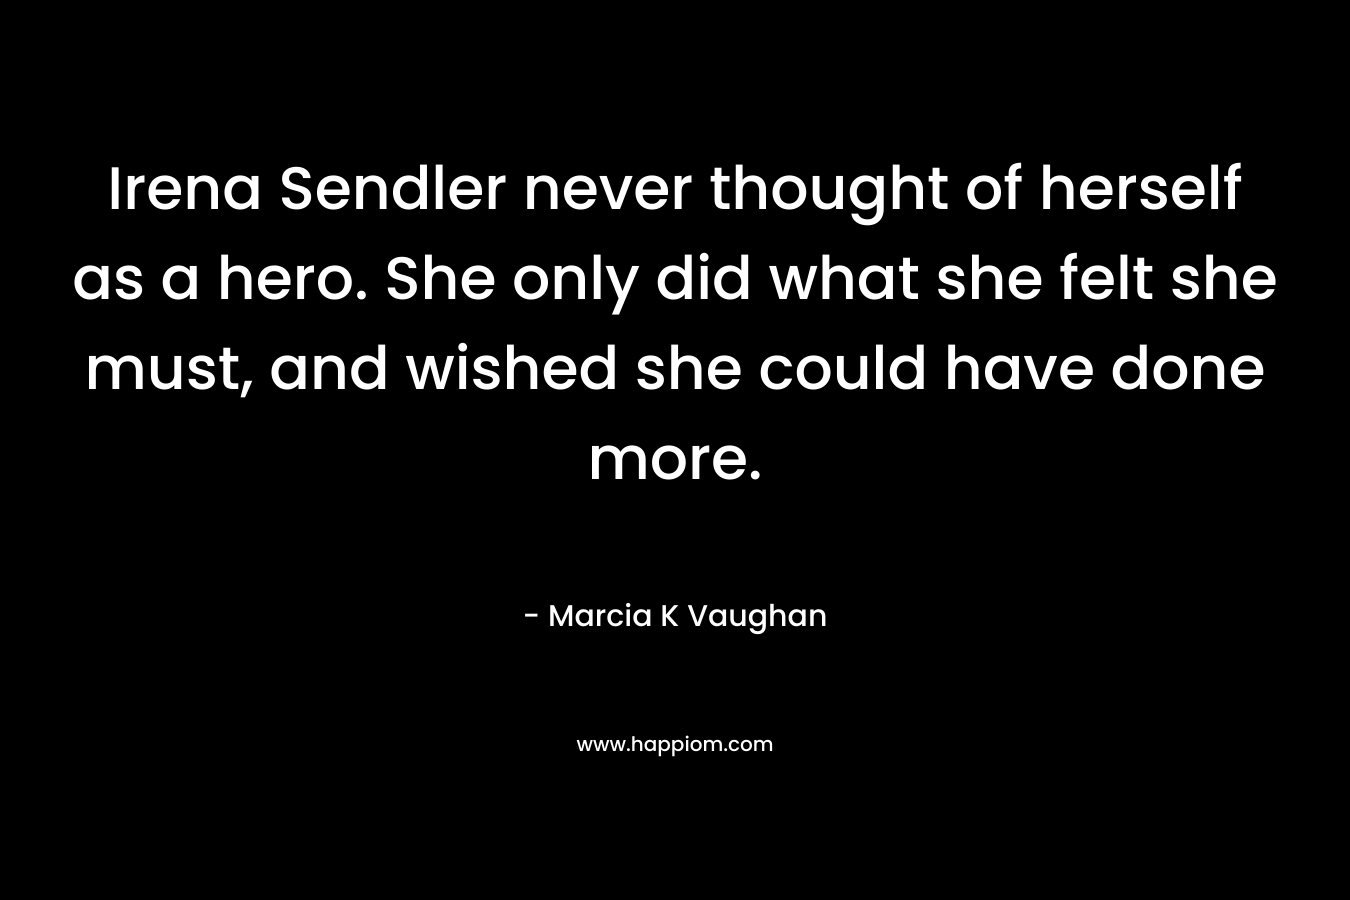 Irena Sendler never thought of herself as a hero. She only did what she felt she must, and wished she could have done more. – Marcia K Vaughan